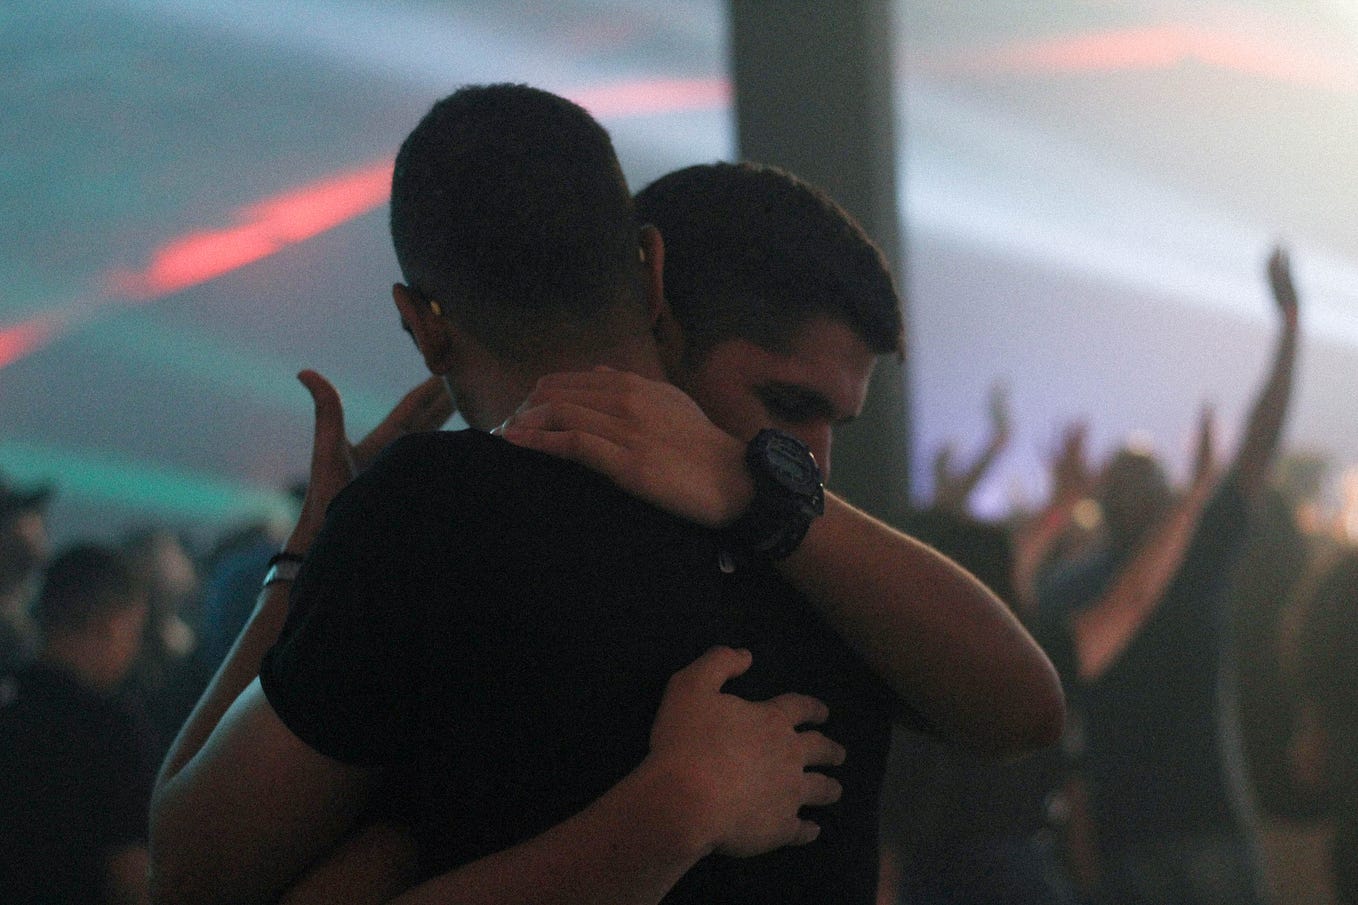 Two men with short dark hair hugging. They appear to be White.